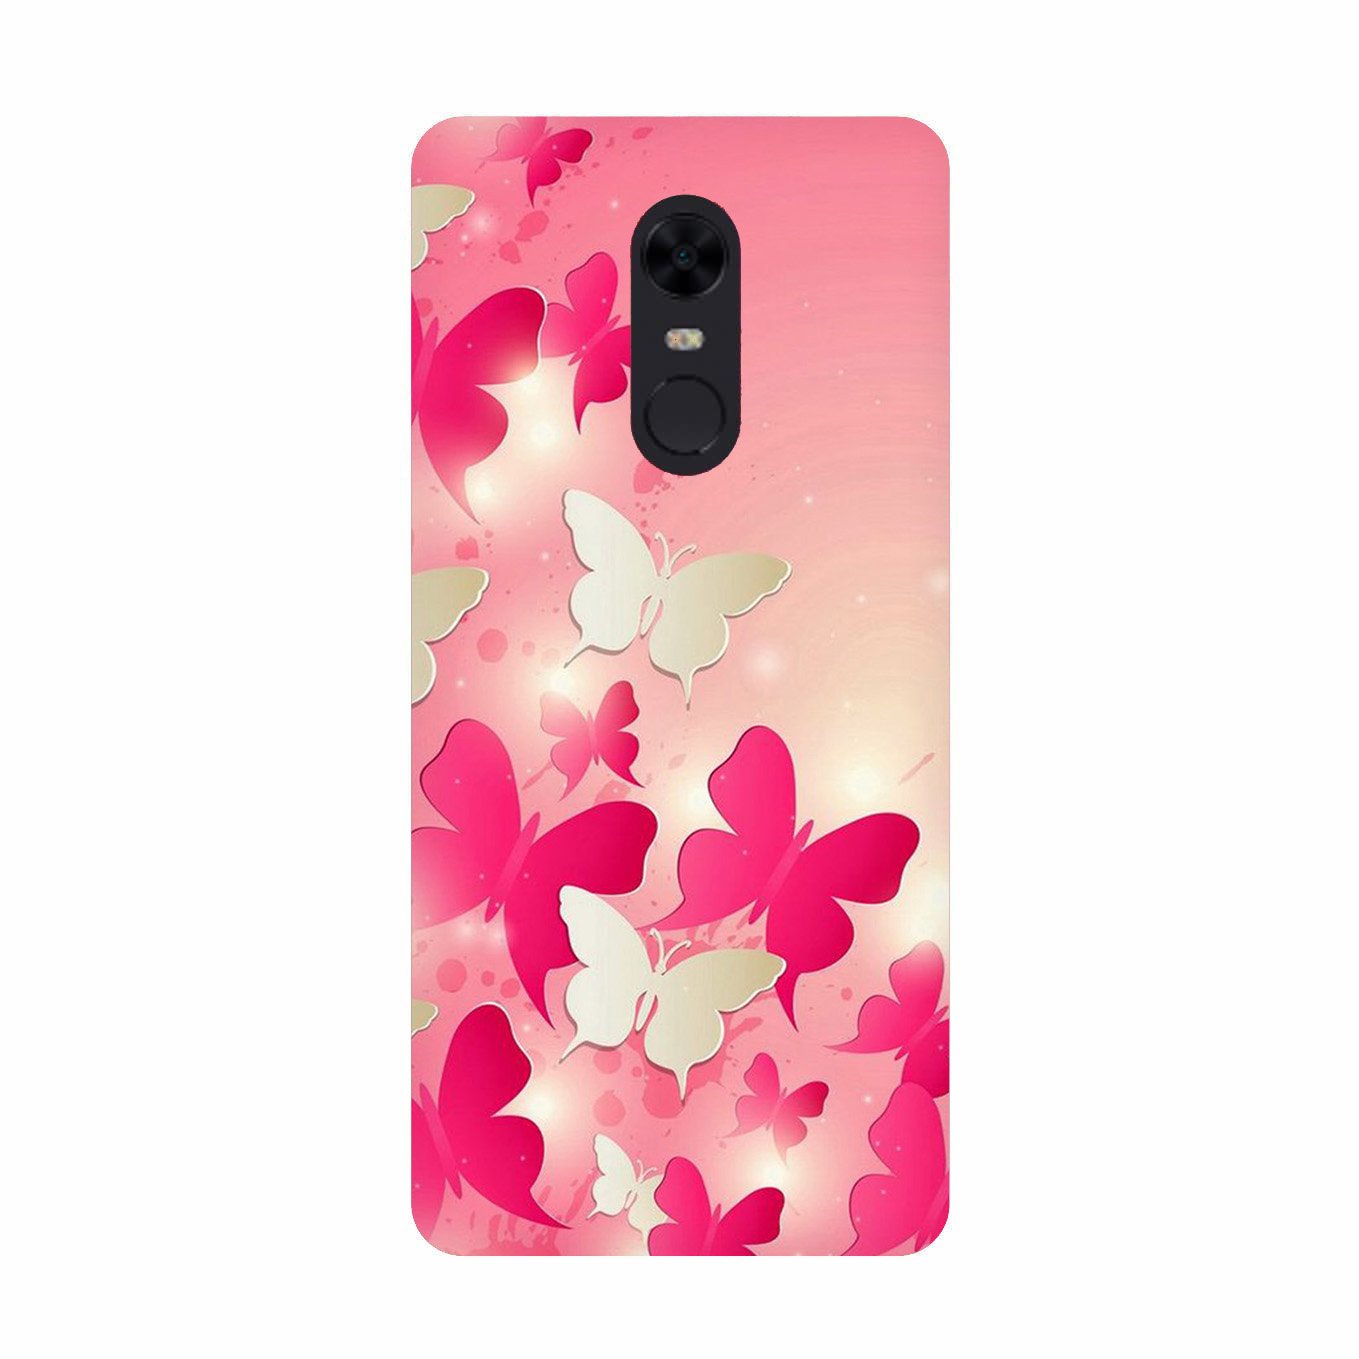 White Pick Butterflies Case for Redmi Note 5